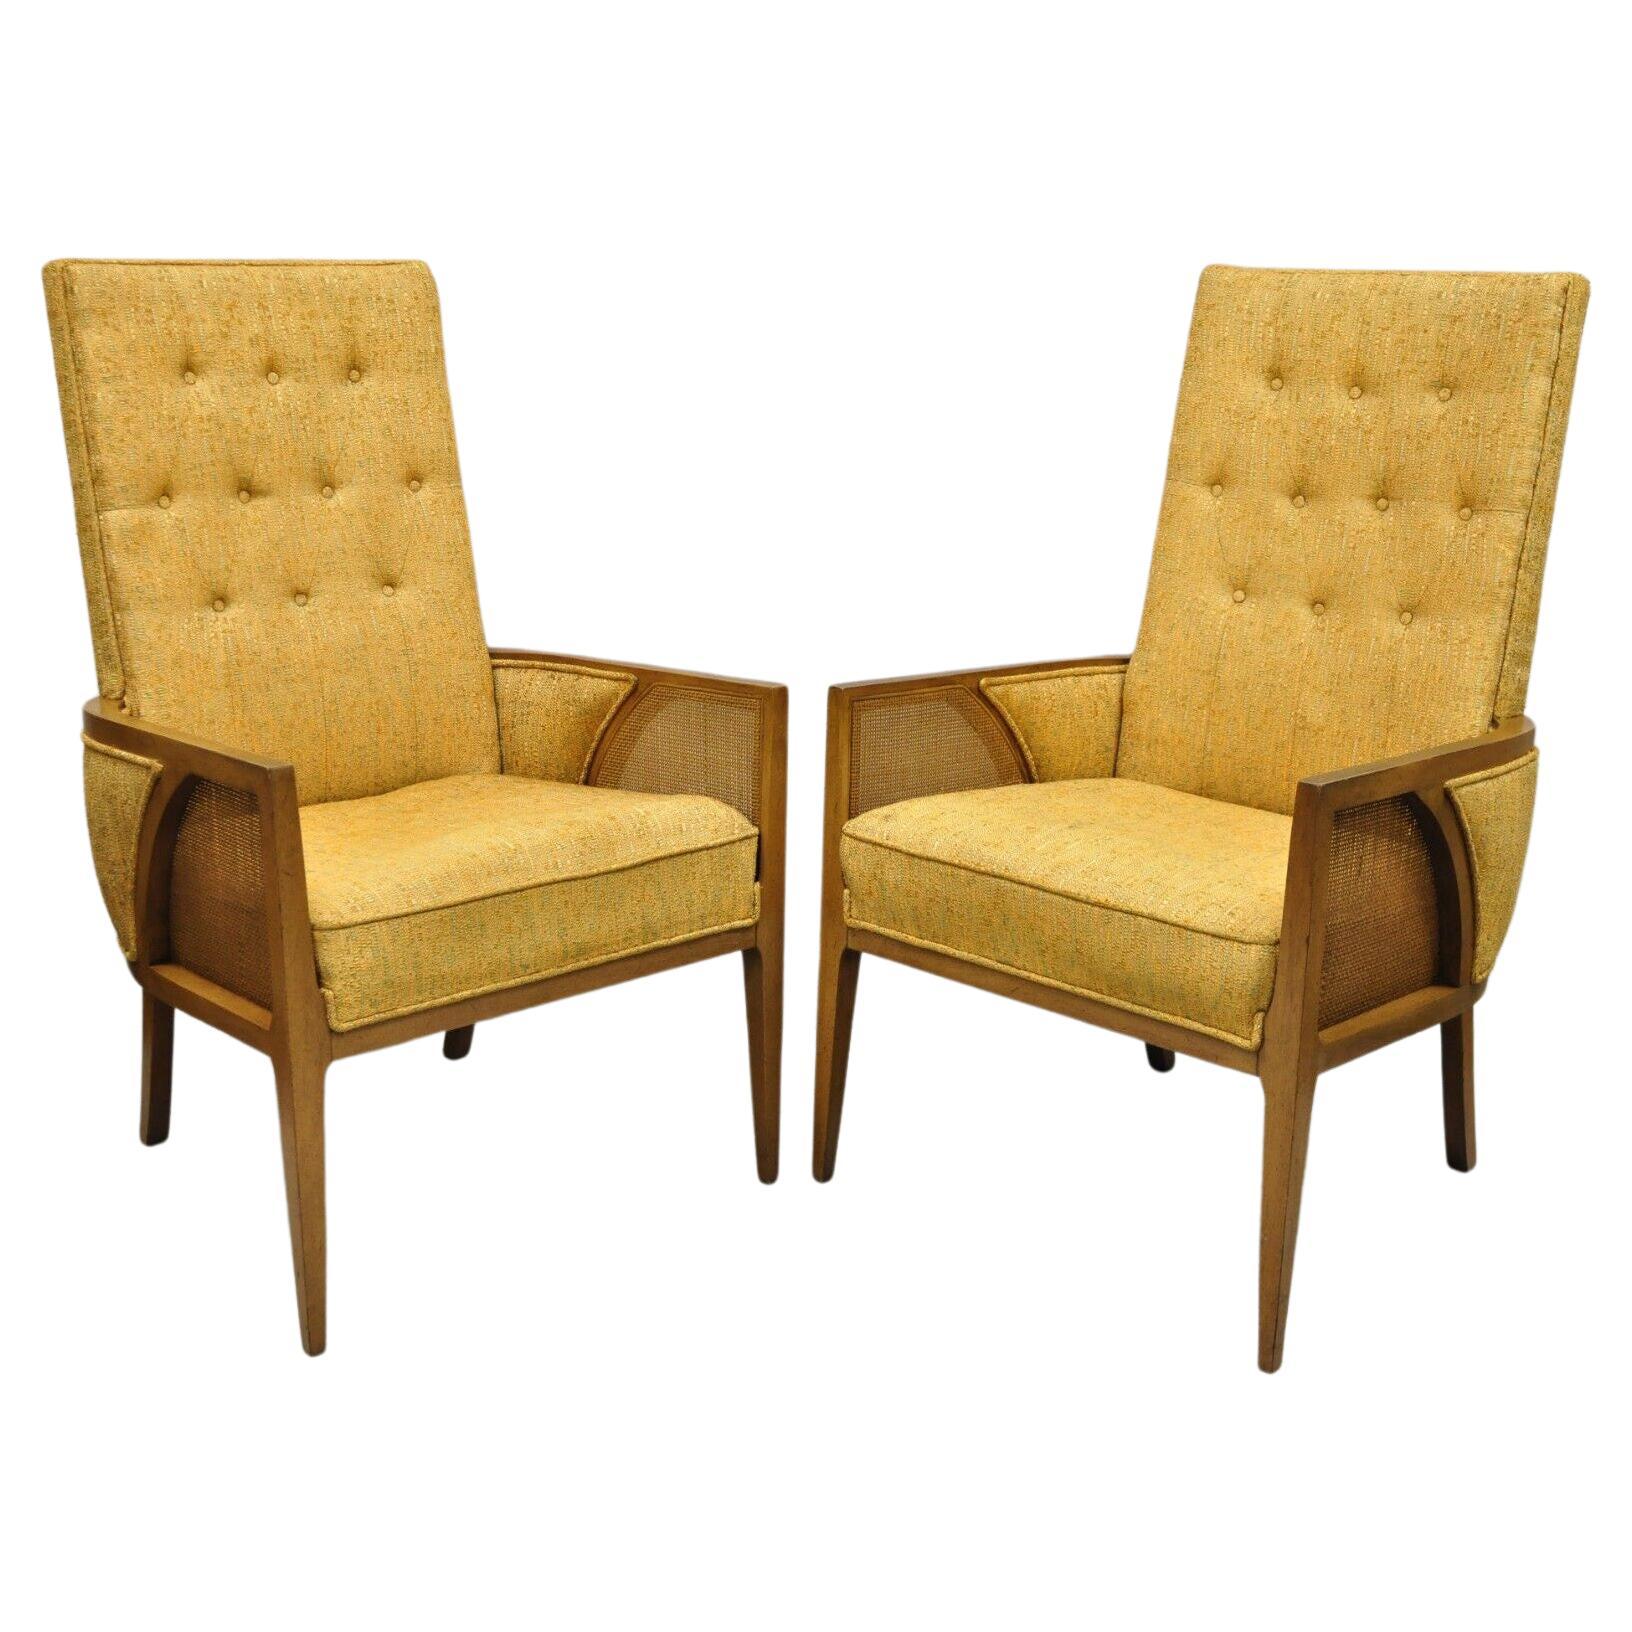 Mid Century Hollywood Regency Sculpted Wood Cane Panel Lounge Chairs - a Pair For Sale